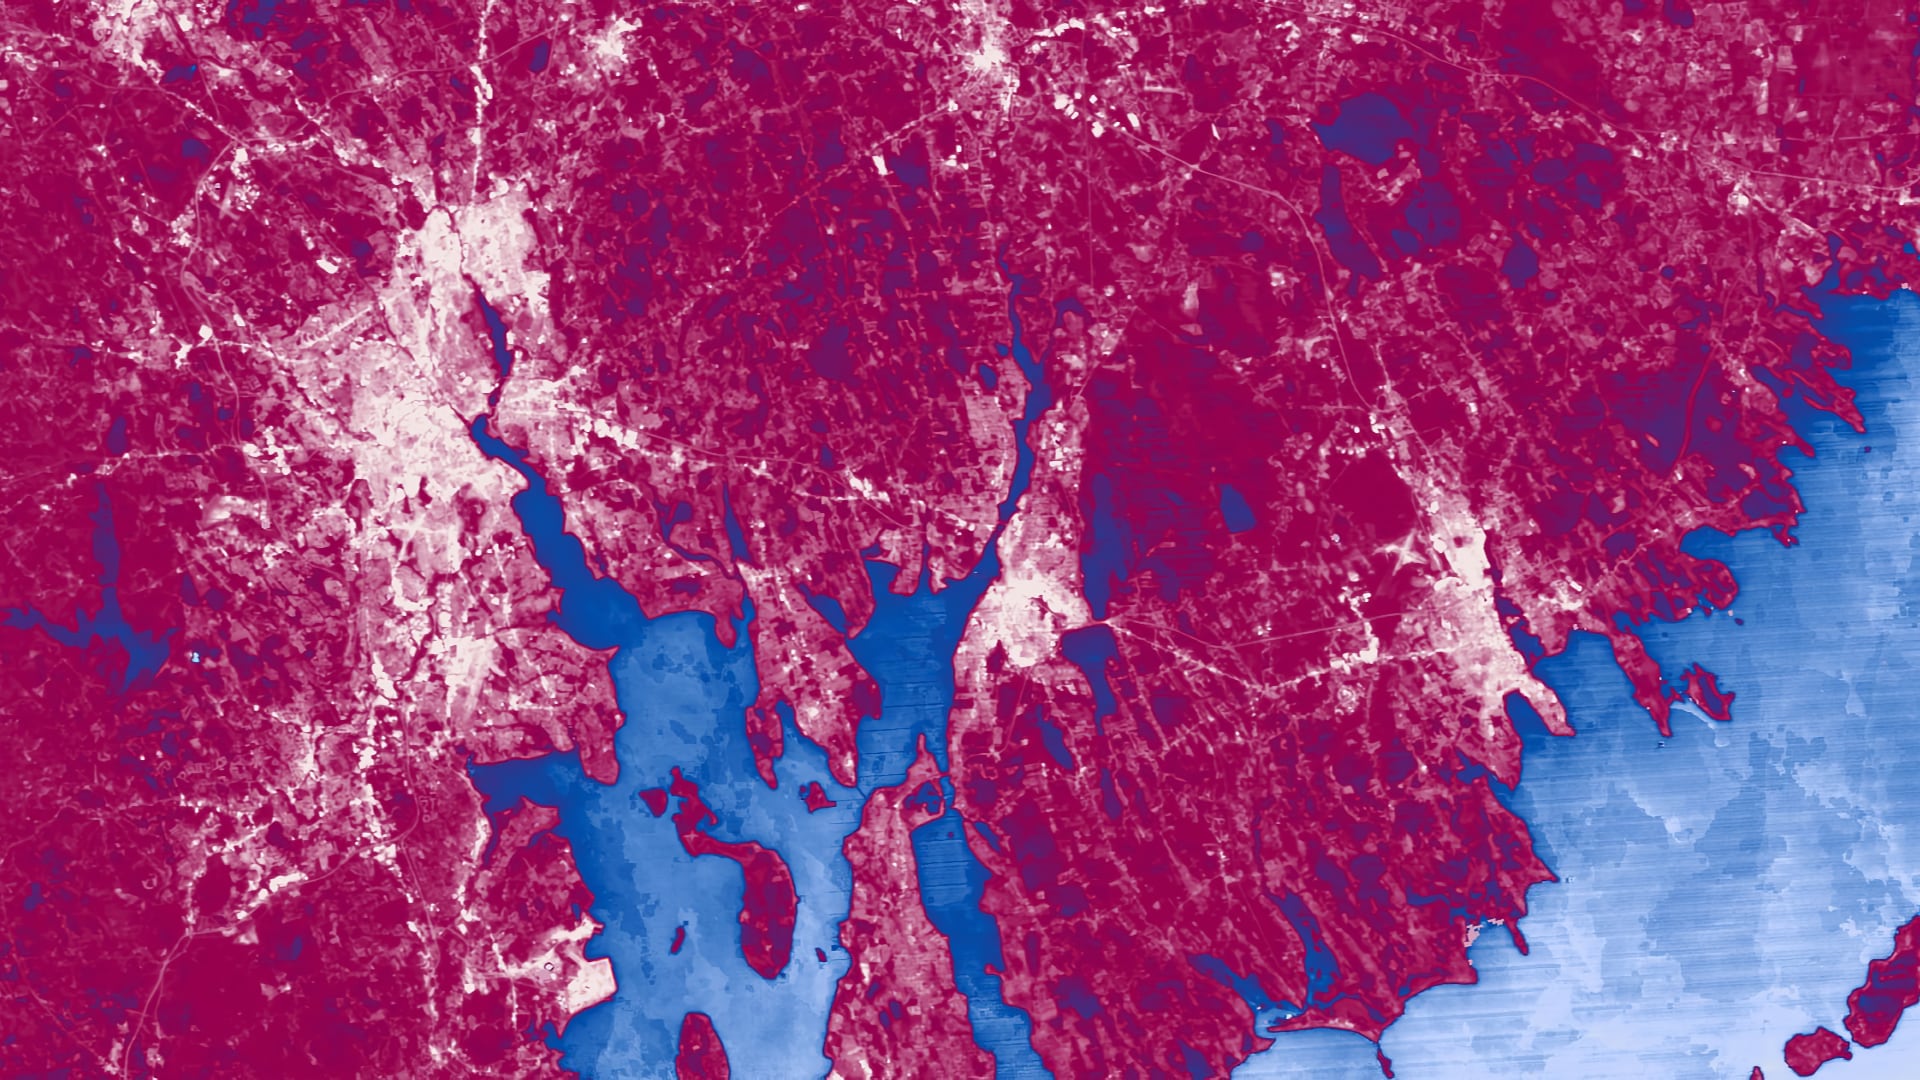 Land surface temperature averages for 2014 through 2018 derived using the new Landsat Level-2 Provisional Surface Temperature product (Landsat 7 ETM+ and Landsat 8 OLI). This image is focused on Providence, RI, and was used to assess urban heat within the city. Higher surface temperatures appear lighter pink; lower surface temperatures appear deeper pink. The blue areas represent the water surrounding the area.